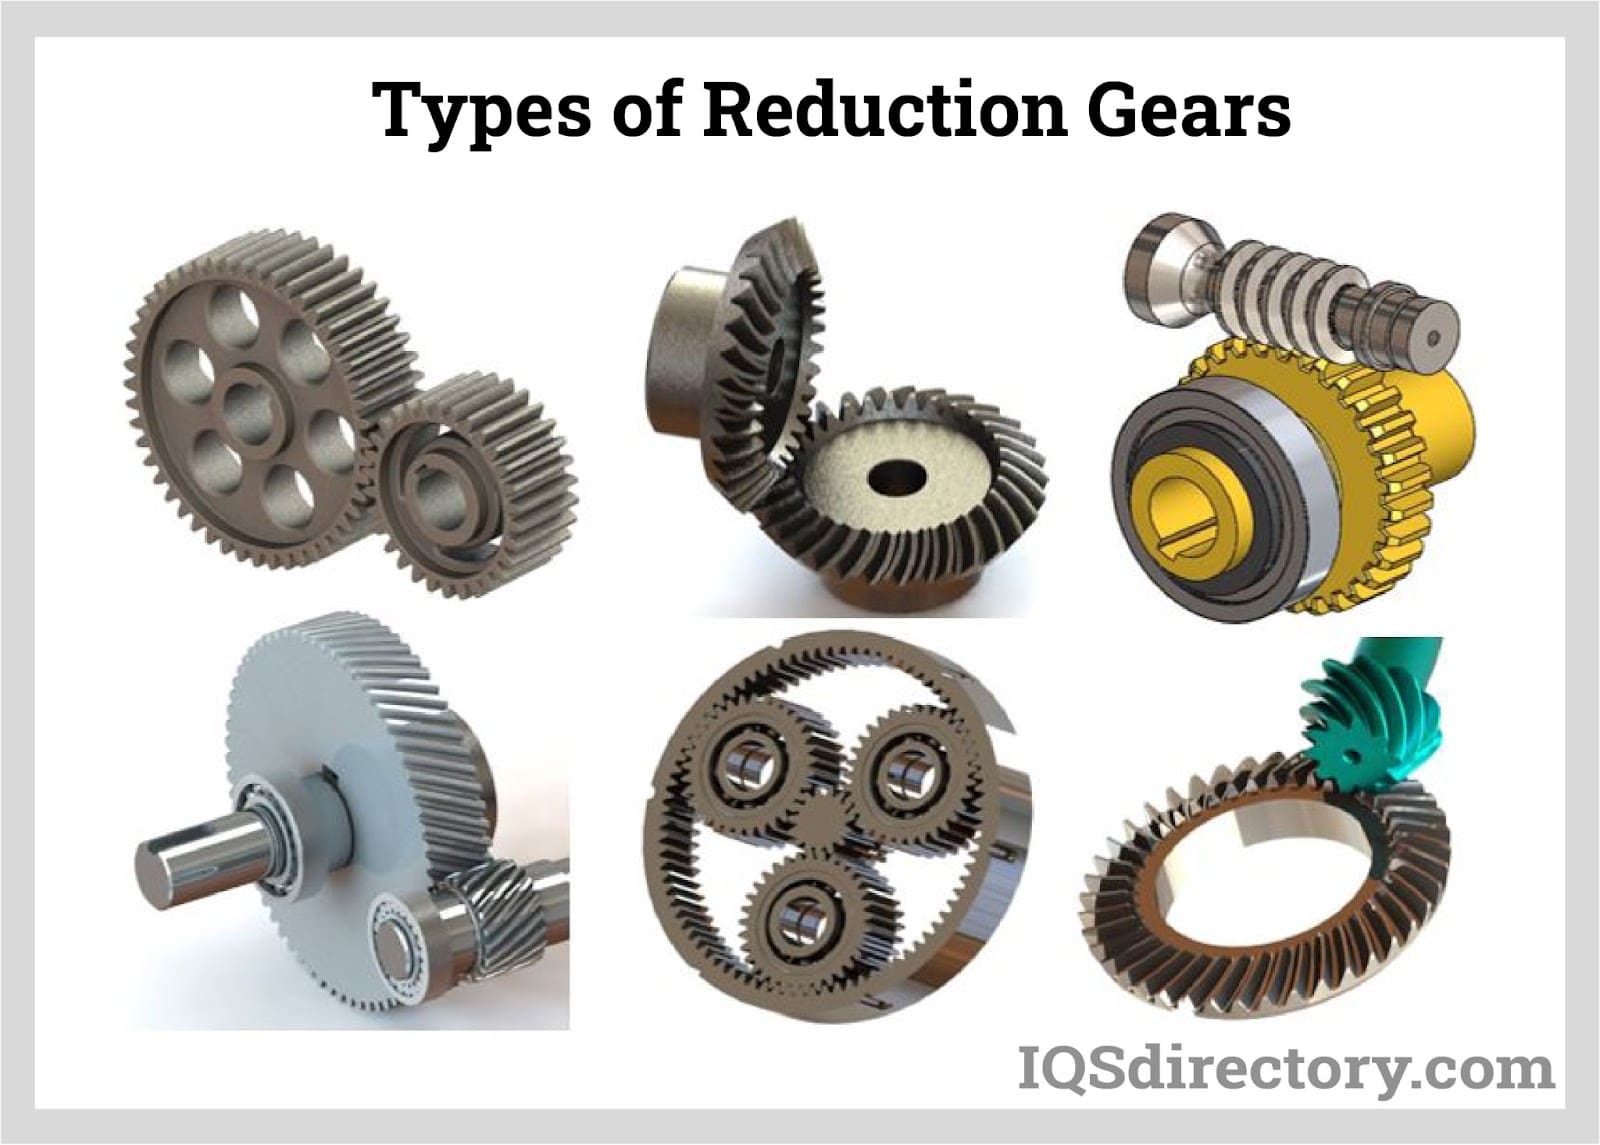 Types of Reduction Gears